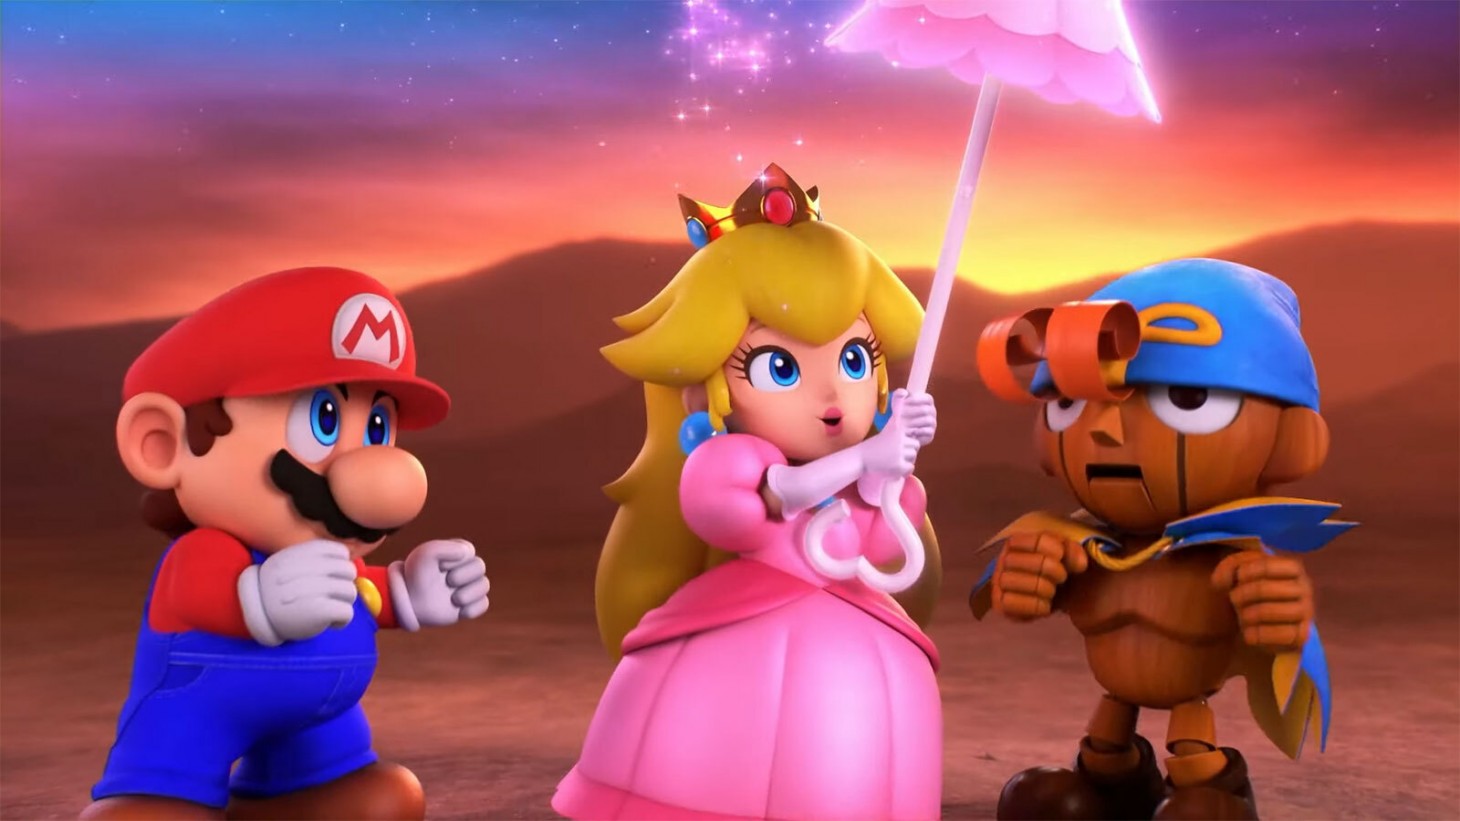 5 things to look for from this year's Super Mario RPG remake